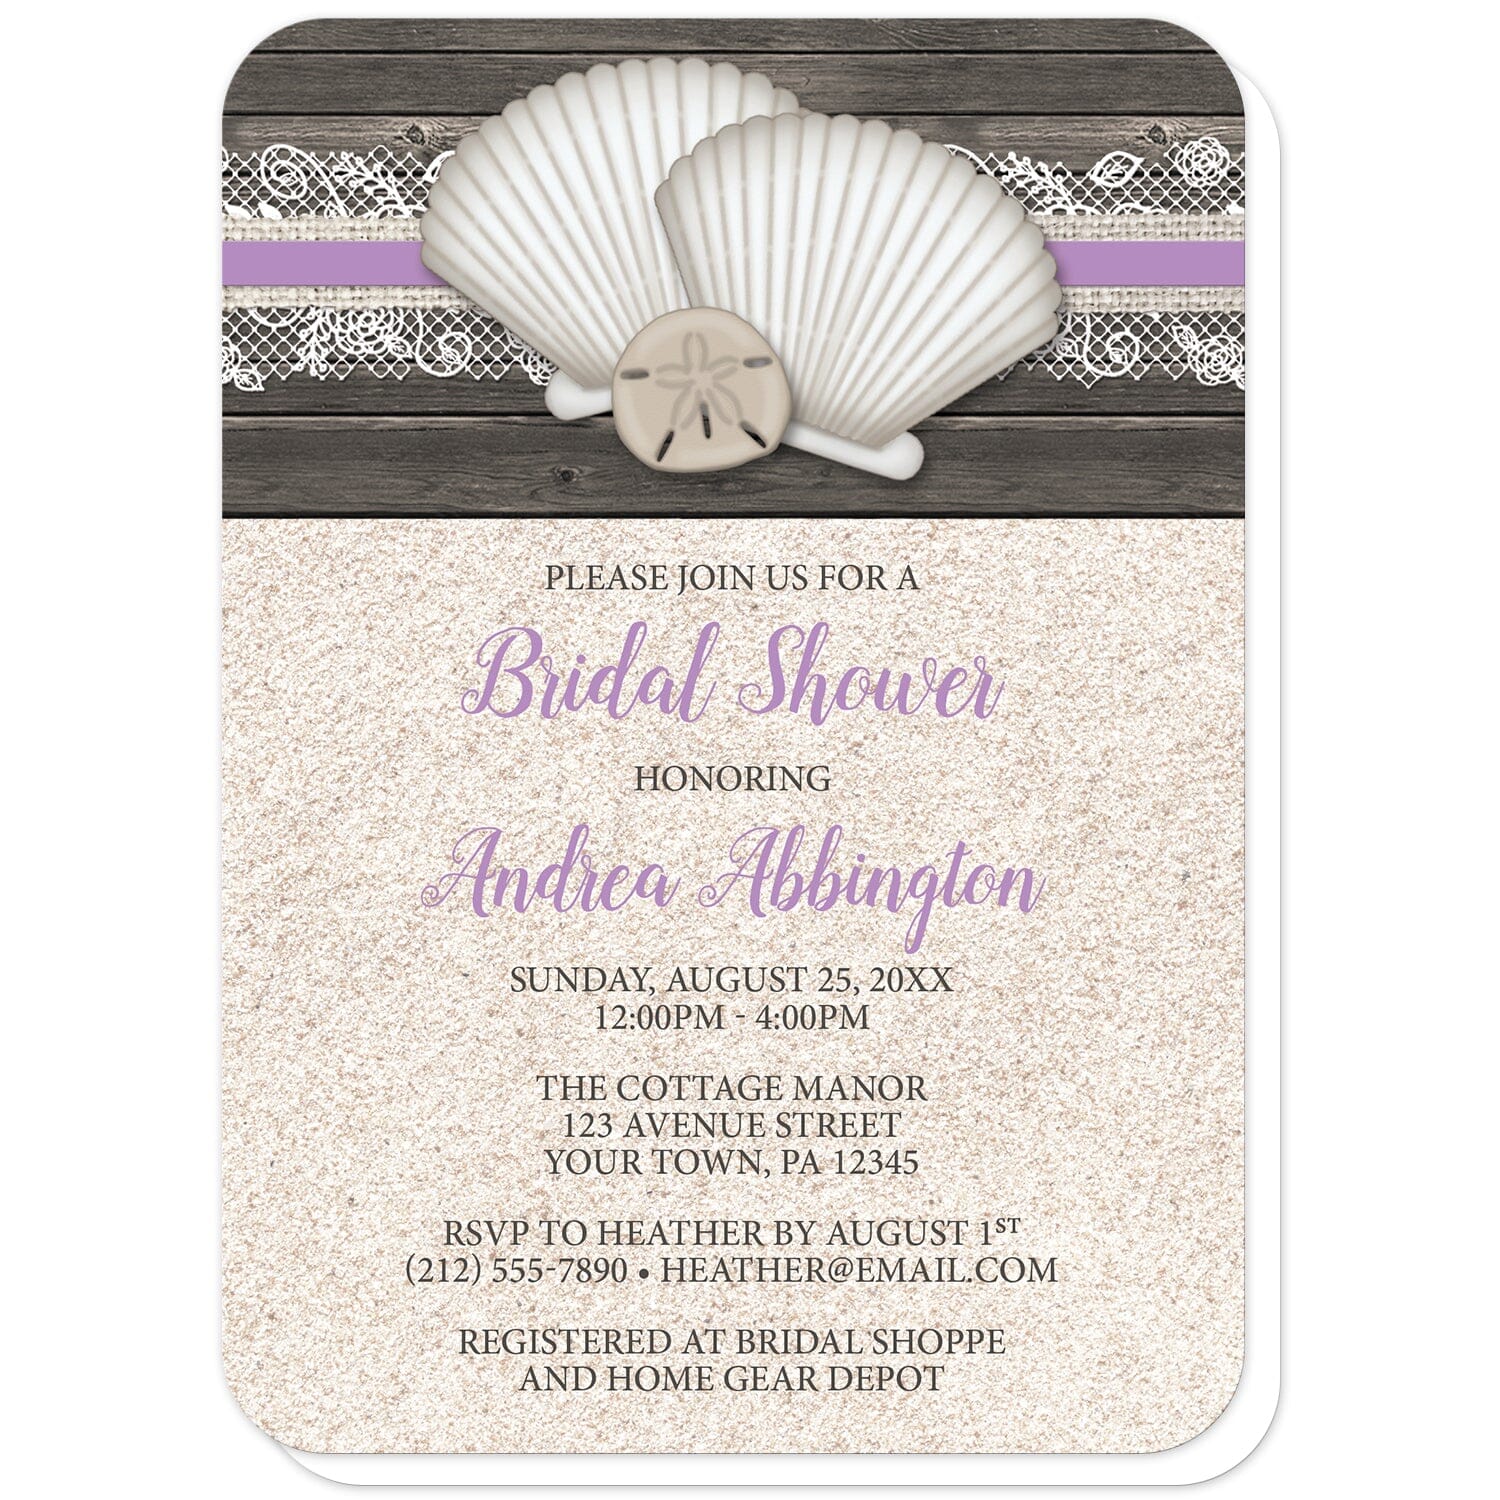 Seashell Lace Wood and Sand Purple Beach Bridal Shower Invitations (with rounded corners) at Artistically Invited. Rustic seashell lace wood and sand purple beach bridal shower invitations with two seashells and a sand dollar on a purple, burlap and lace ribbon over a dark brown wood pattern along the top. Your personalized bridal shower celebration details are custom printed in dark brown and purple over a beige sand background design below the seashells.